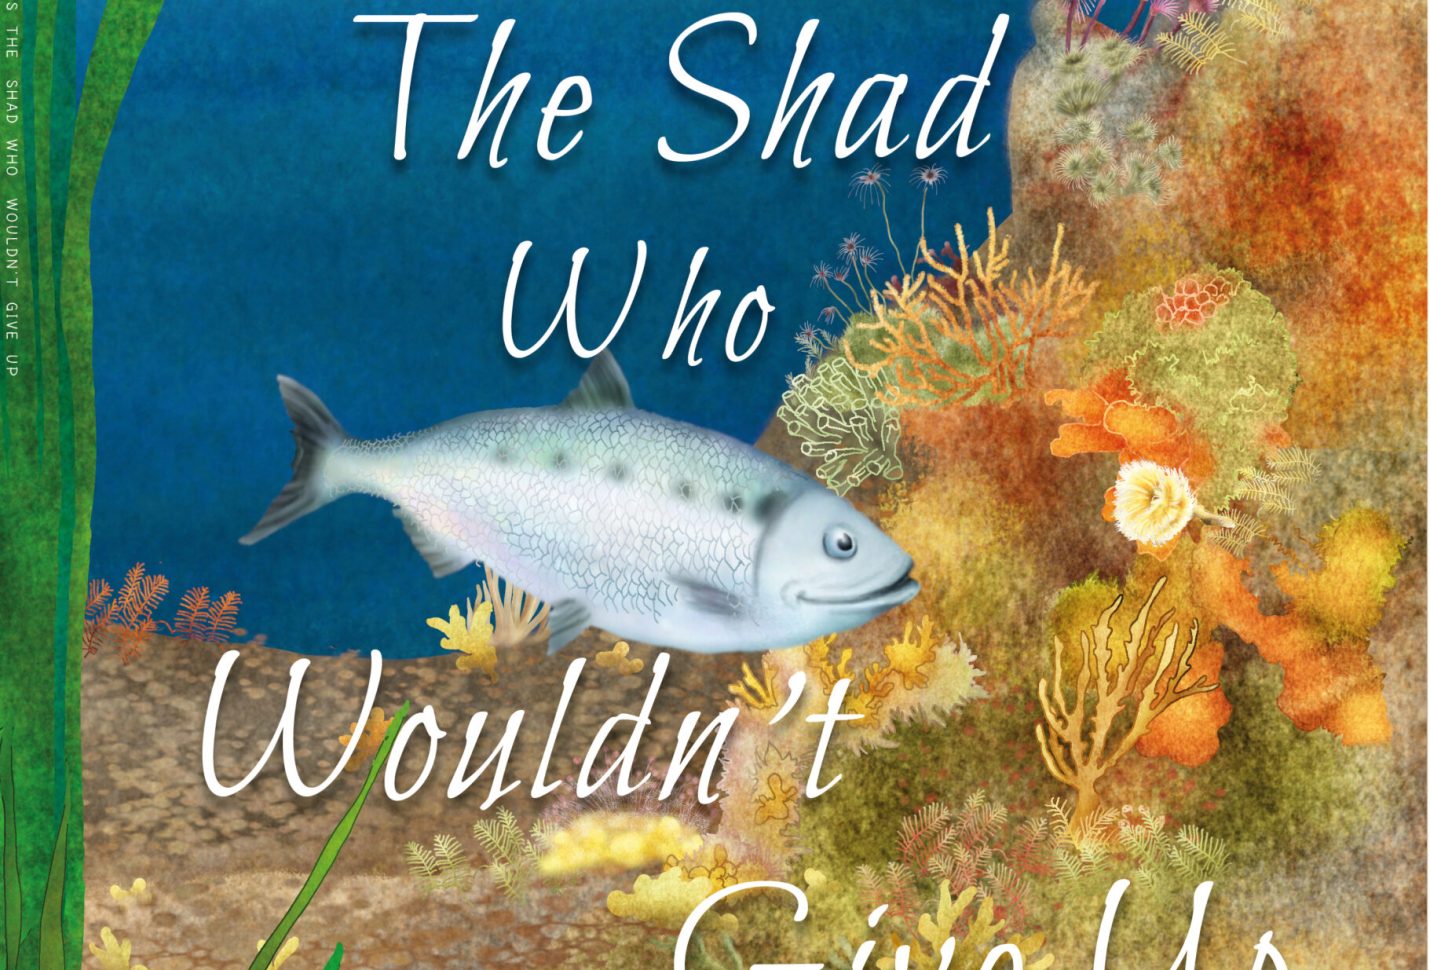 UK book on threatened fish species to allocate sale proceeds to charity WRT